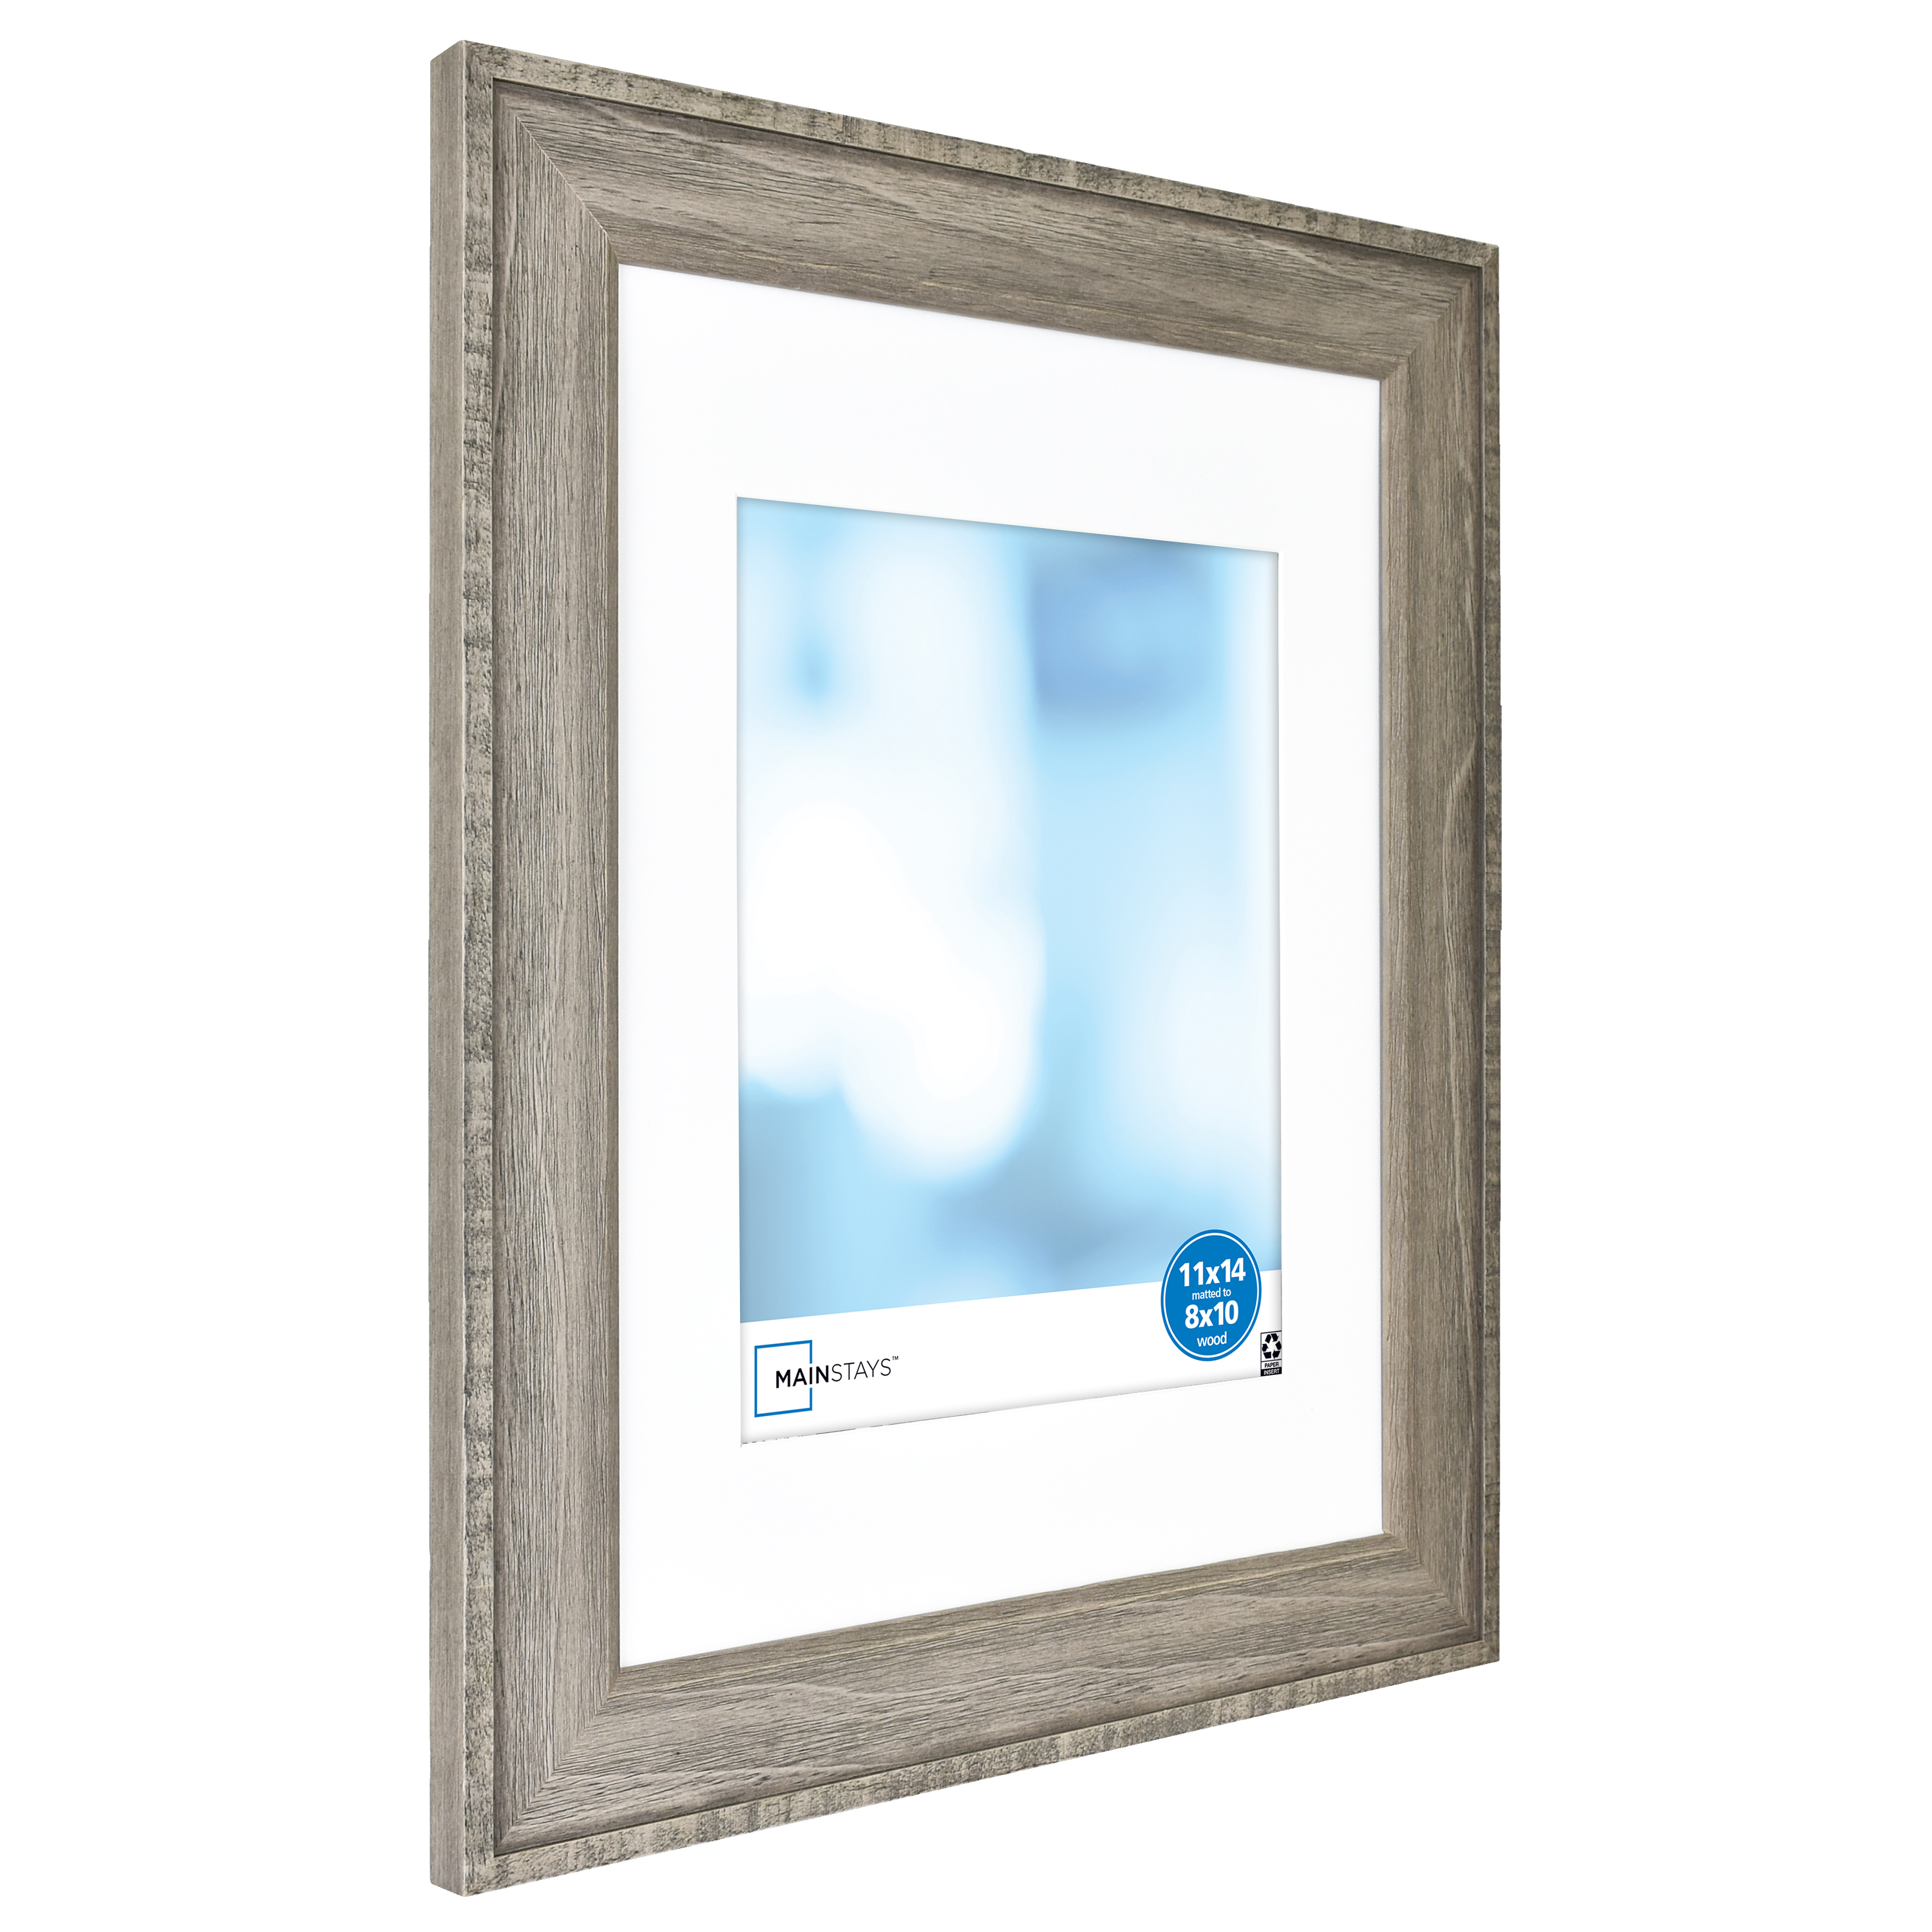 Mainstays 11"x14" matted to 8"x10" Rustic Wood Gallery Picture Wall Frame - image 5 of 6